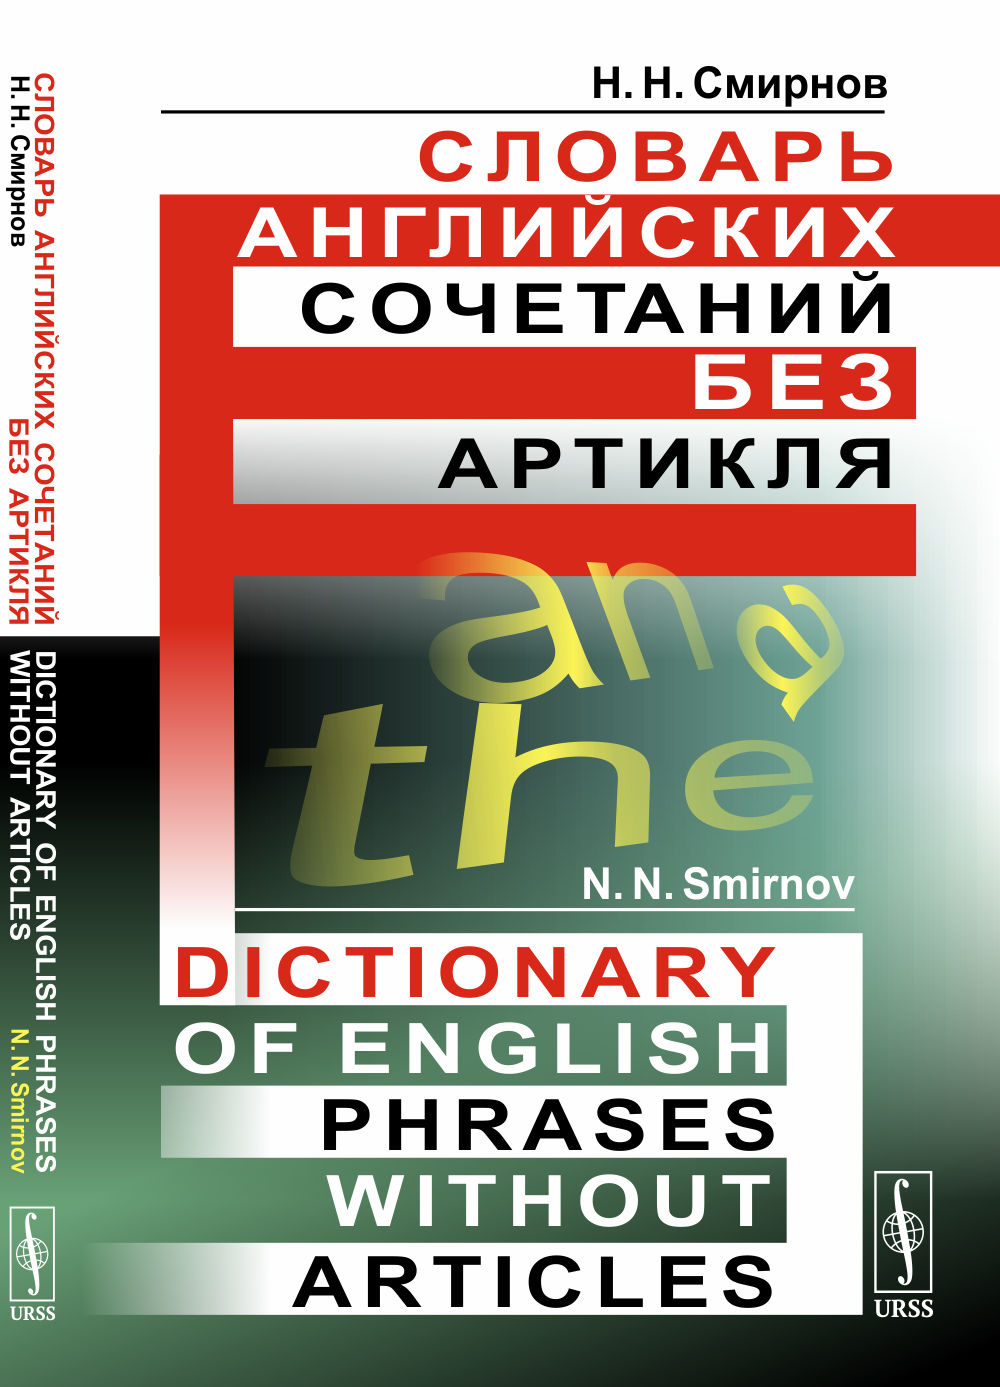     : N. N. Smirnov. Dictionary of english phrases without articles